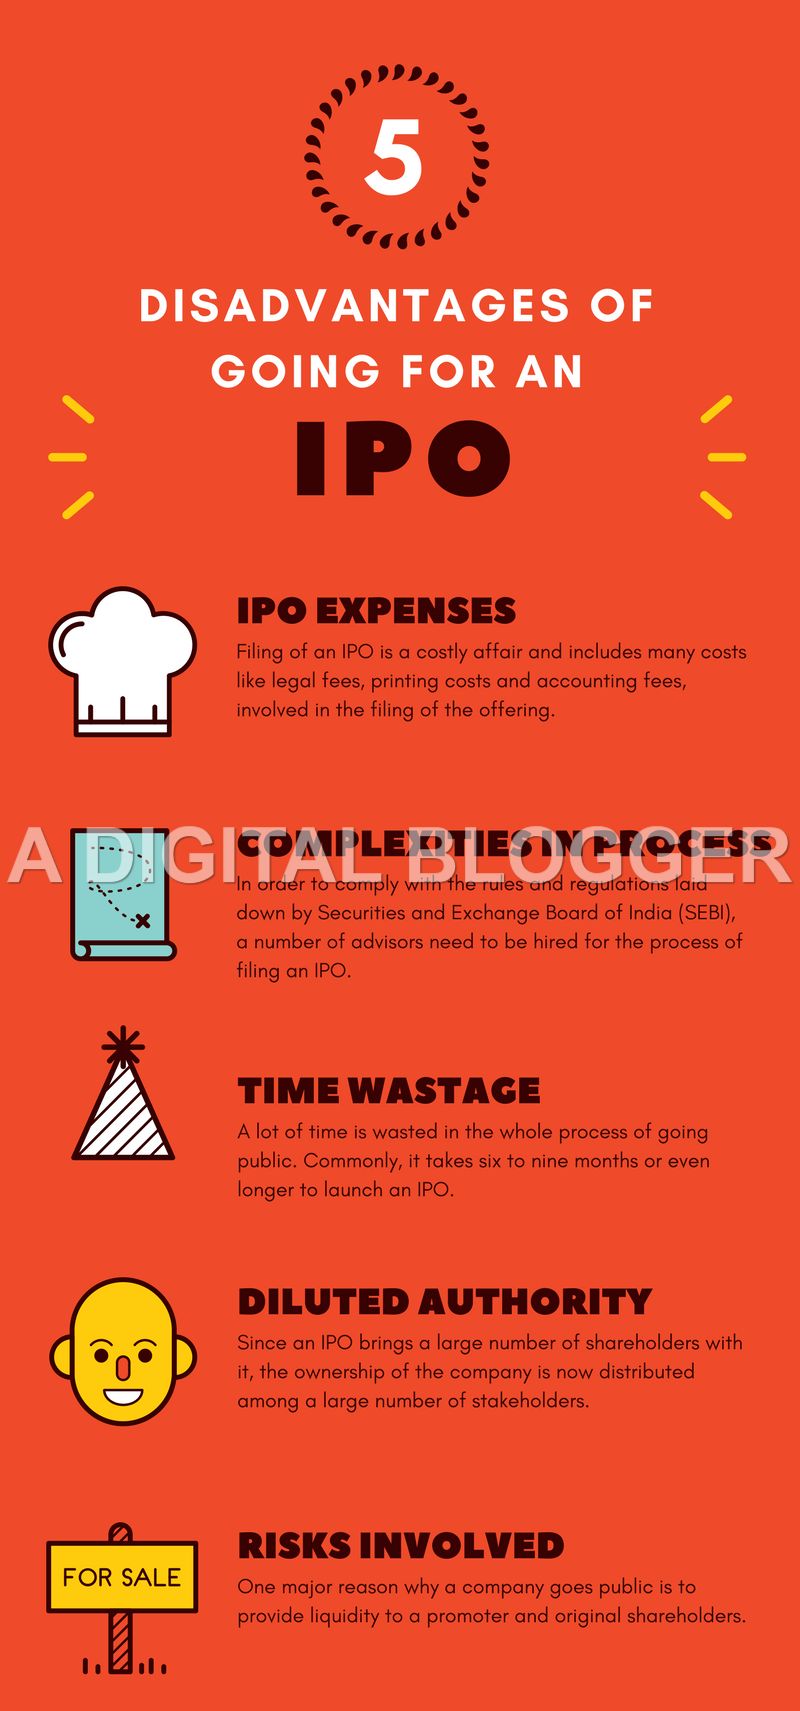 Disadvantages of IPO